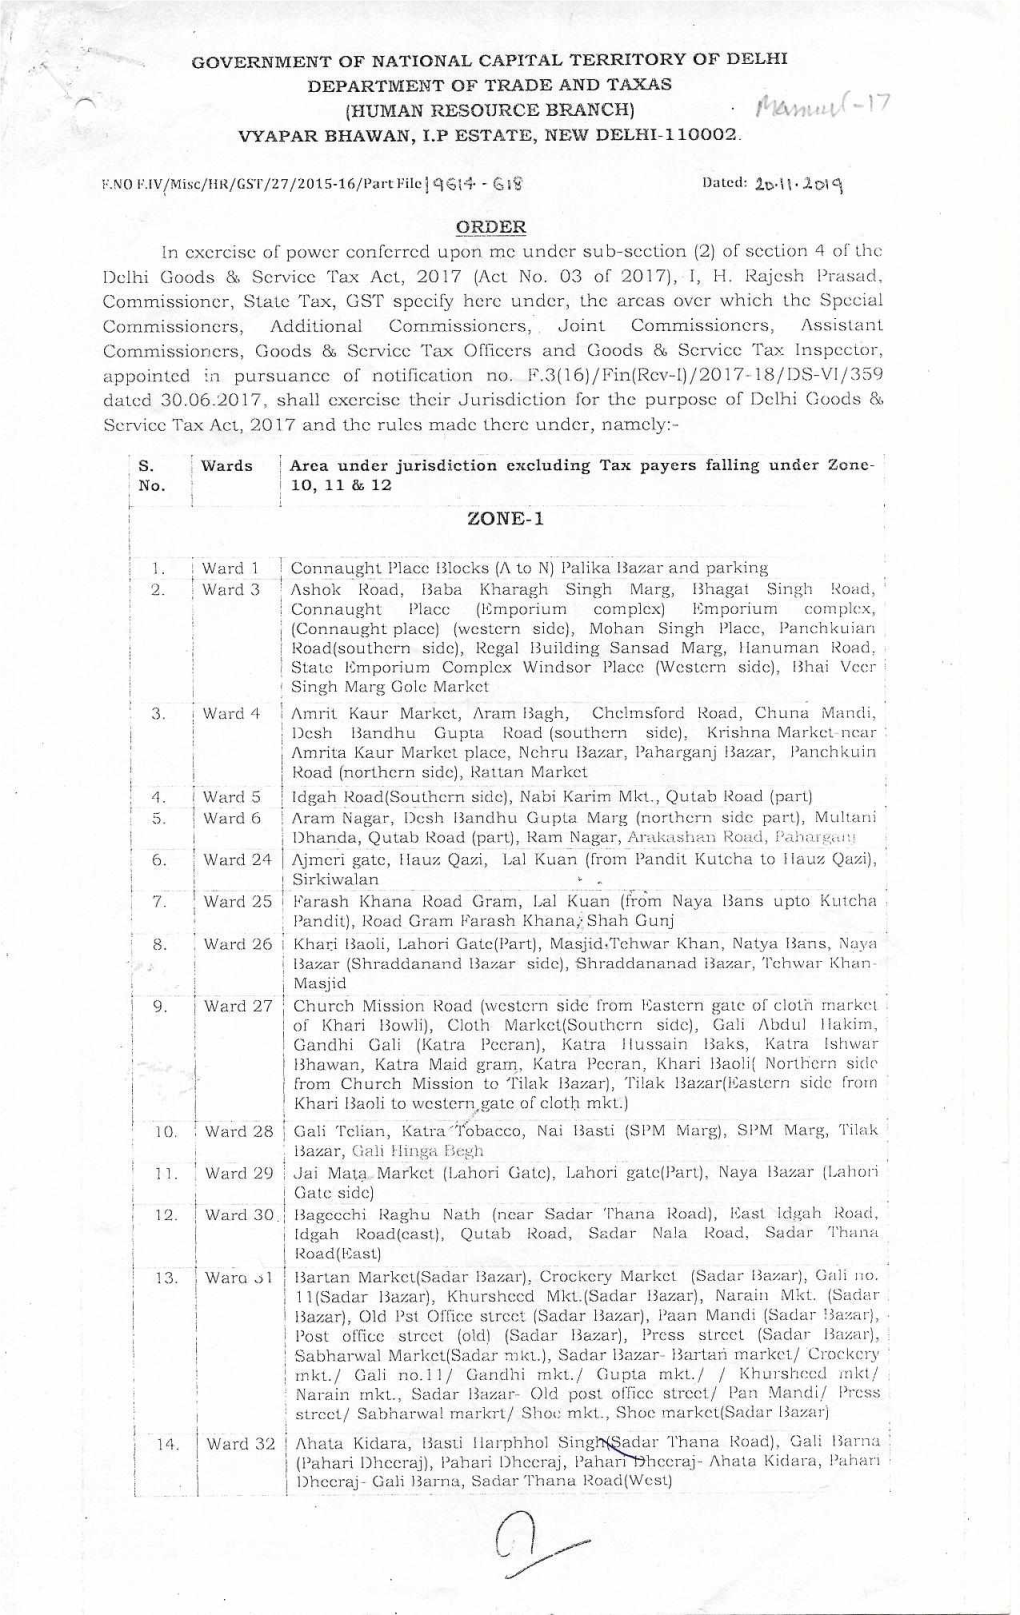 GOVERNMENT of NATIONAL CAPITAL TERRITORY of DELHI DEPARTMENT of TRADE and T AXAS (HUMAN RESOURCE BRANCH)� ' Ila410,Tf - VYAPAR BHAWAN, I.? ESTATE, NEW DELHI-110002